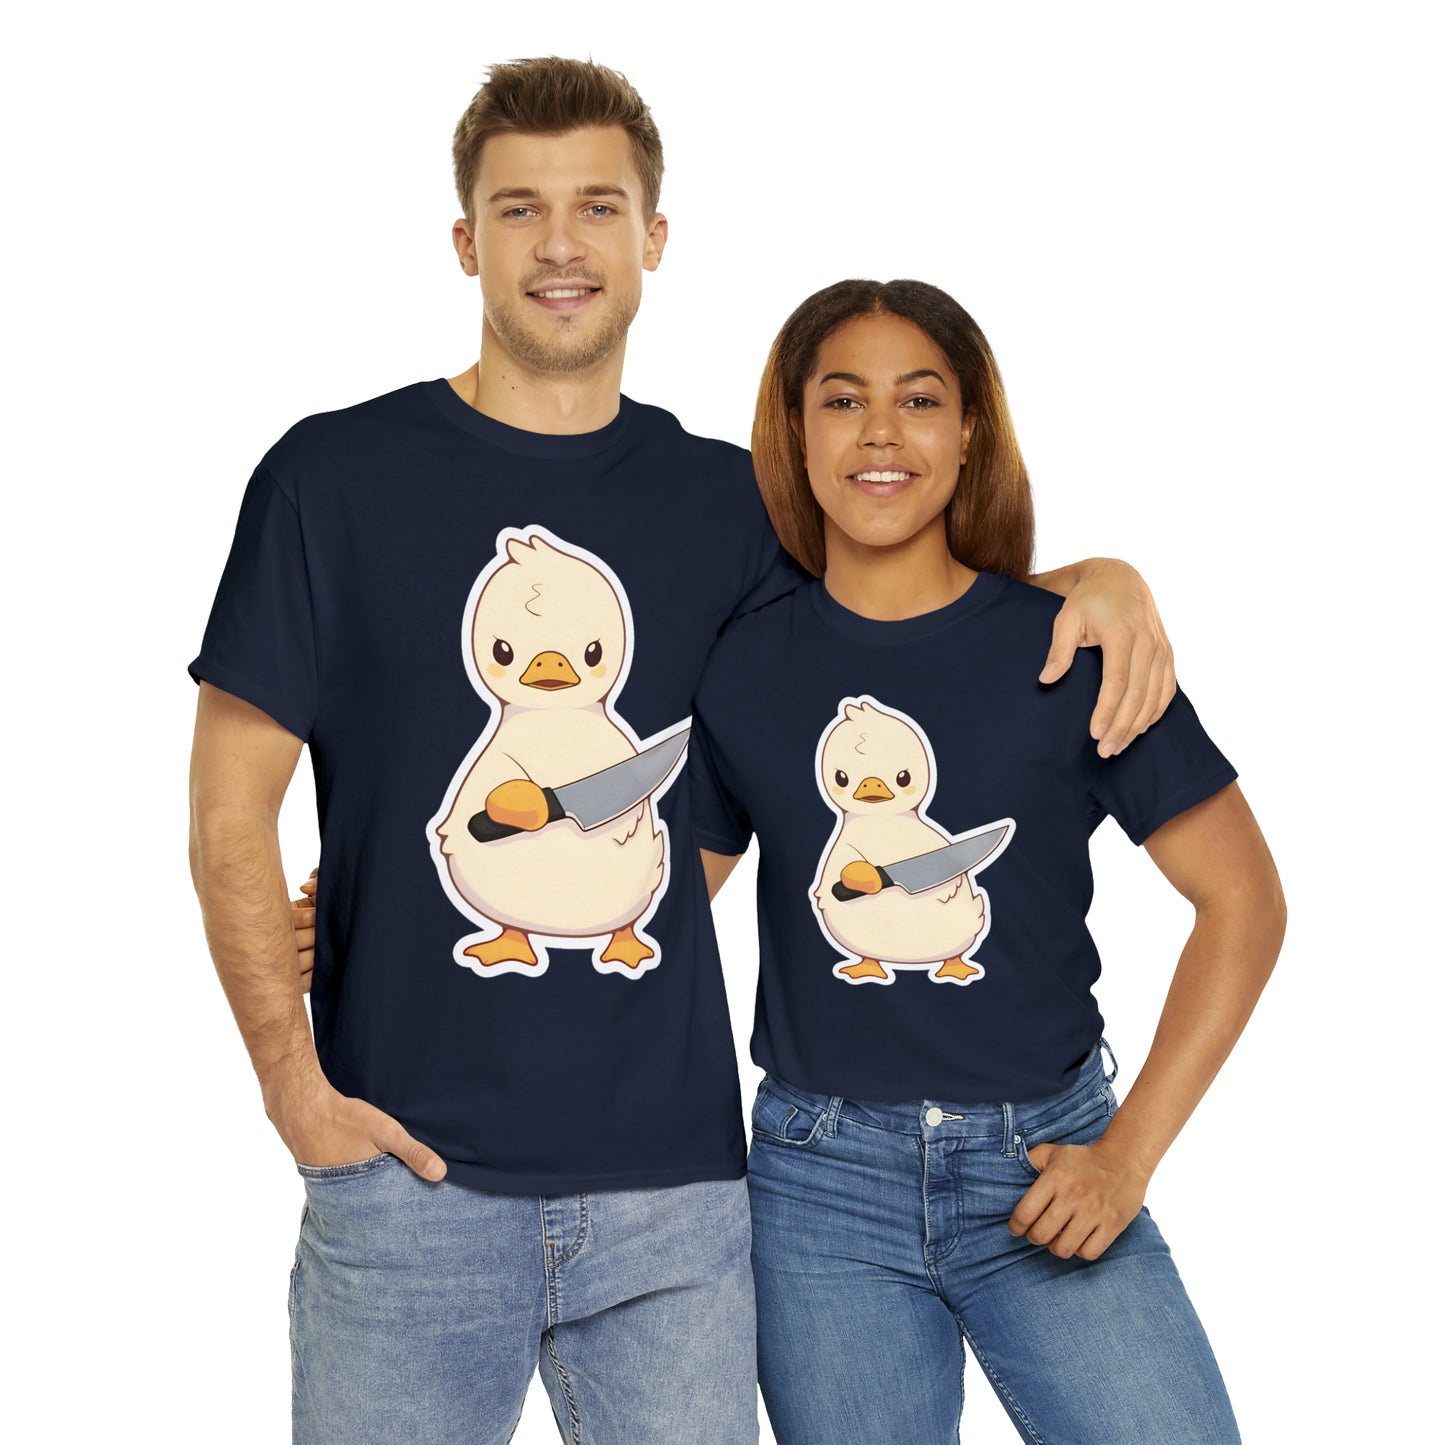 Duck With Knife I May Be Cute But I Never Promised to Play Nice Unisex Cotton Tee by ZeesDesign Model Mockups on White background in color of black, royal blue, Navy, and Red, free shipping on orders over $50